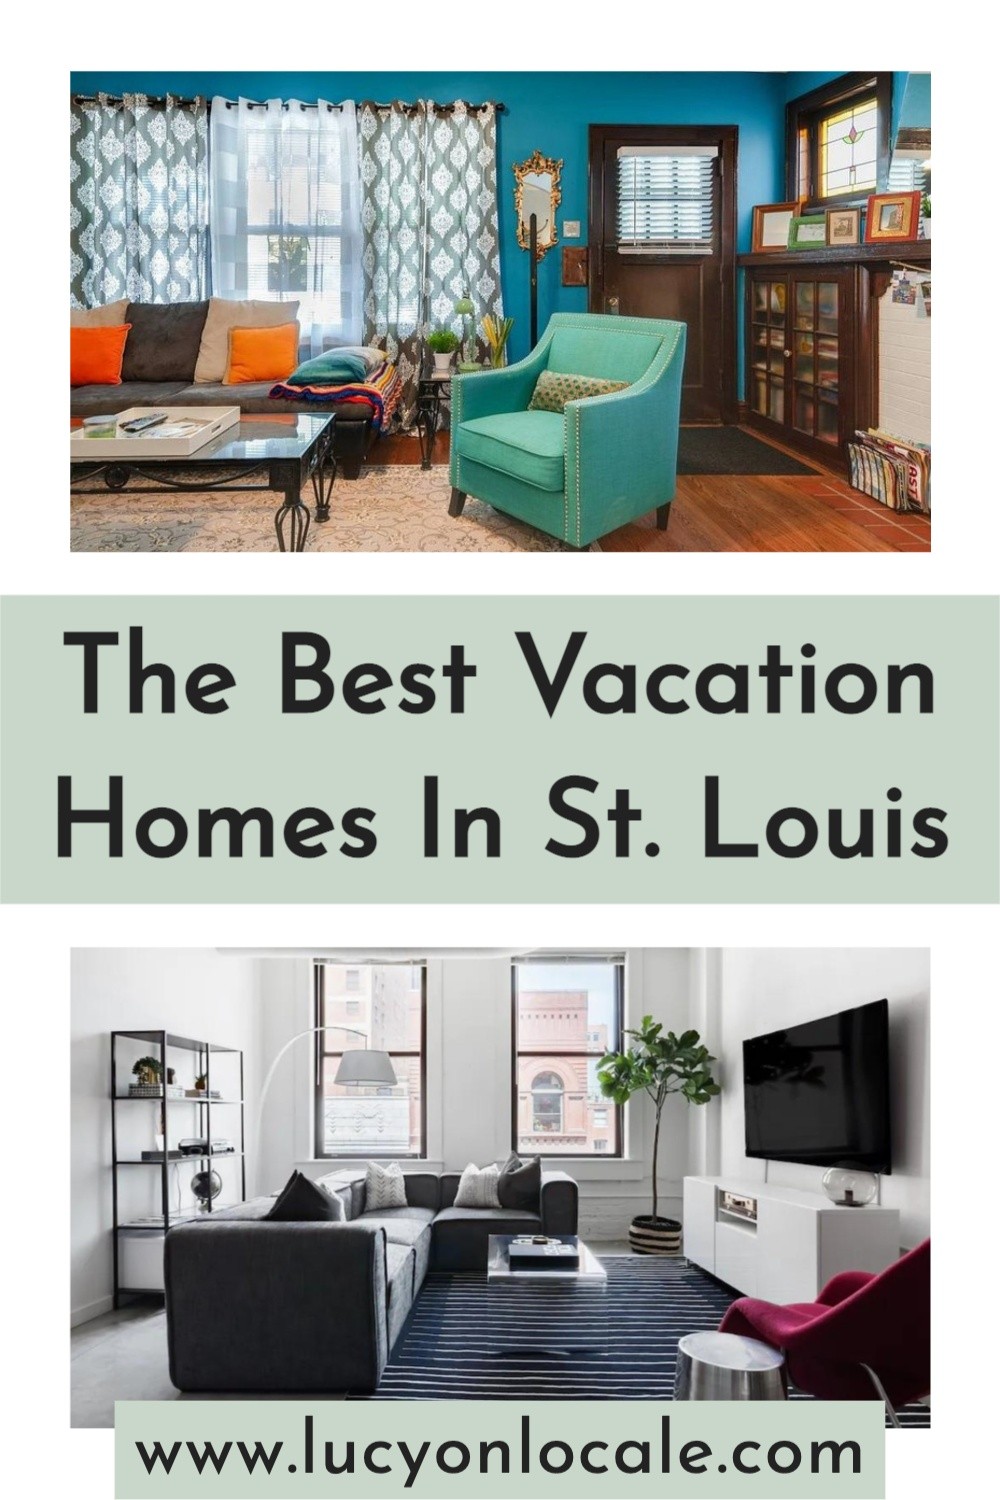 Vacation rental homes in St. Louis, Missouri